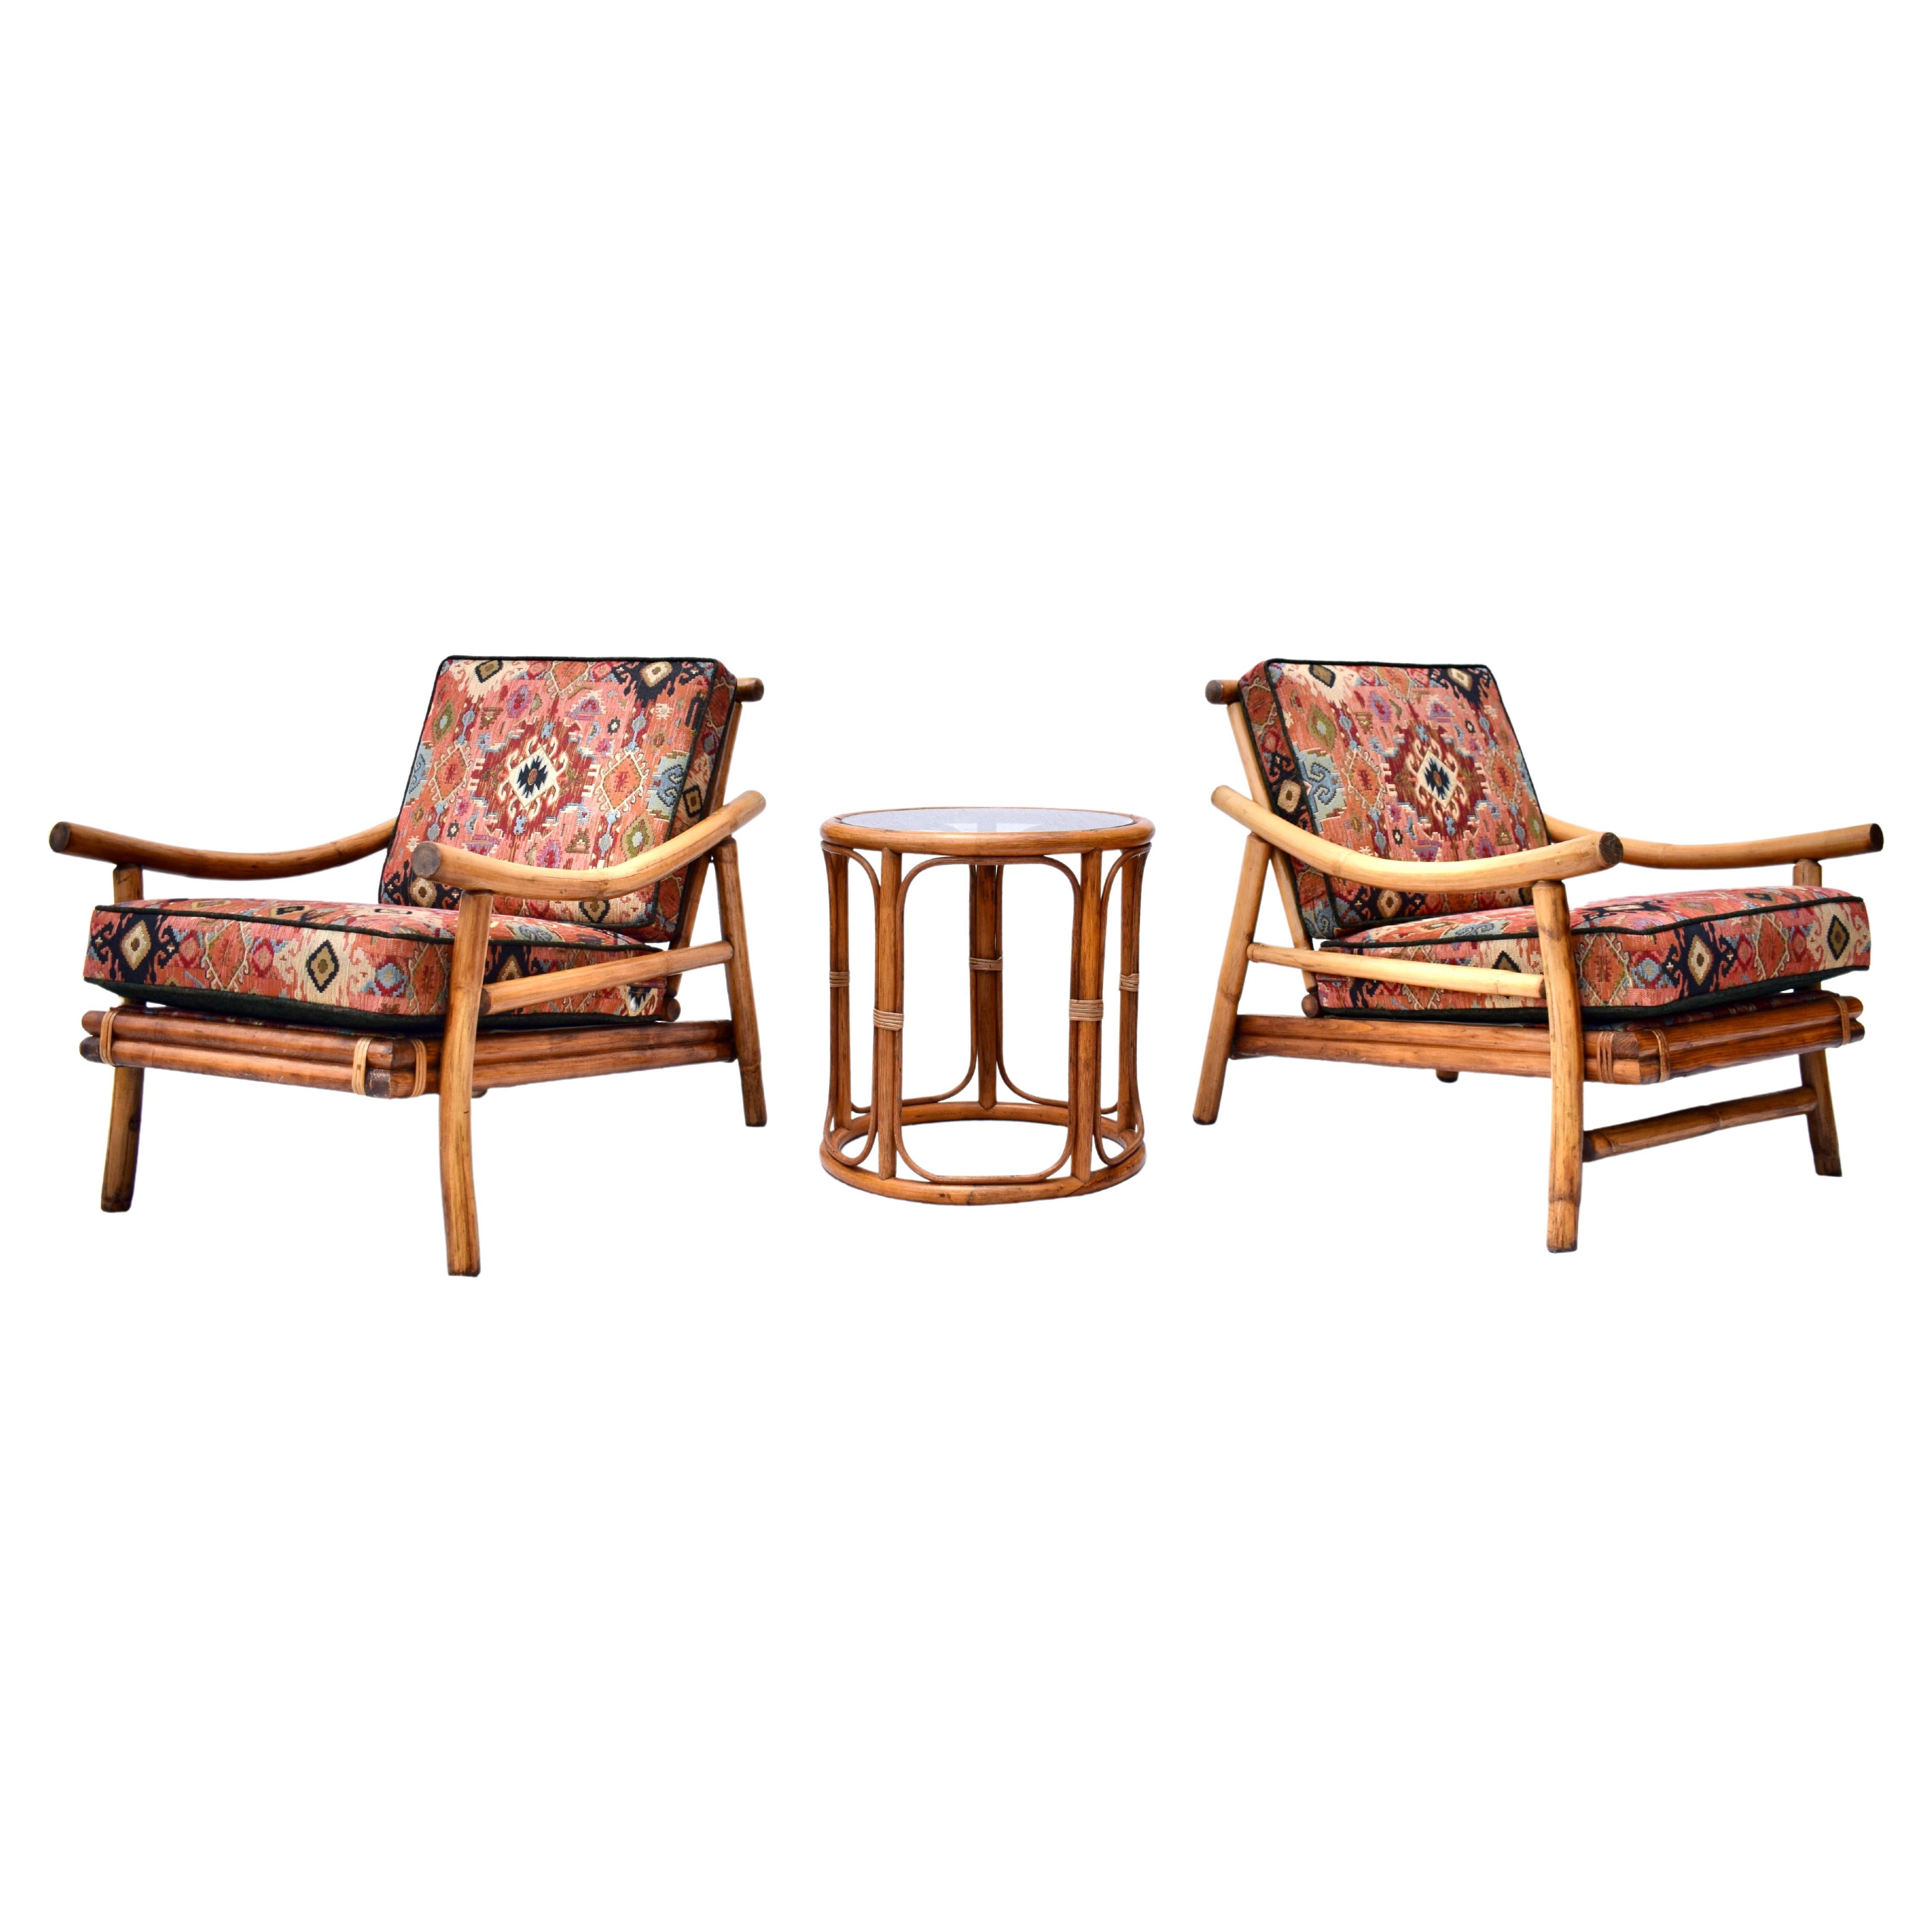 Ficks Reed Pagoda Rattan Chairs & Table Set For Sale